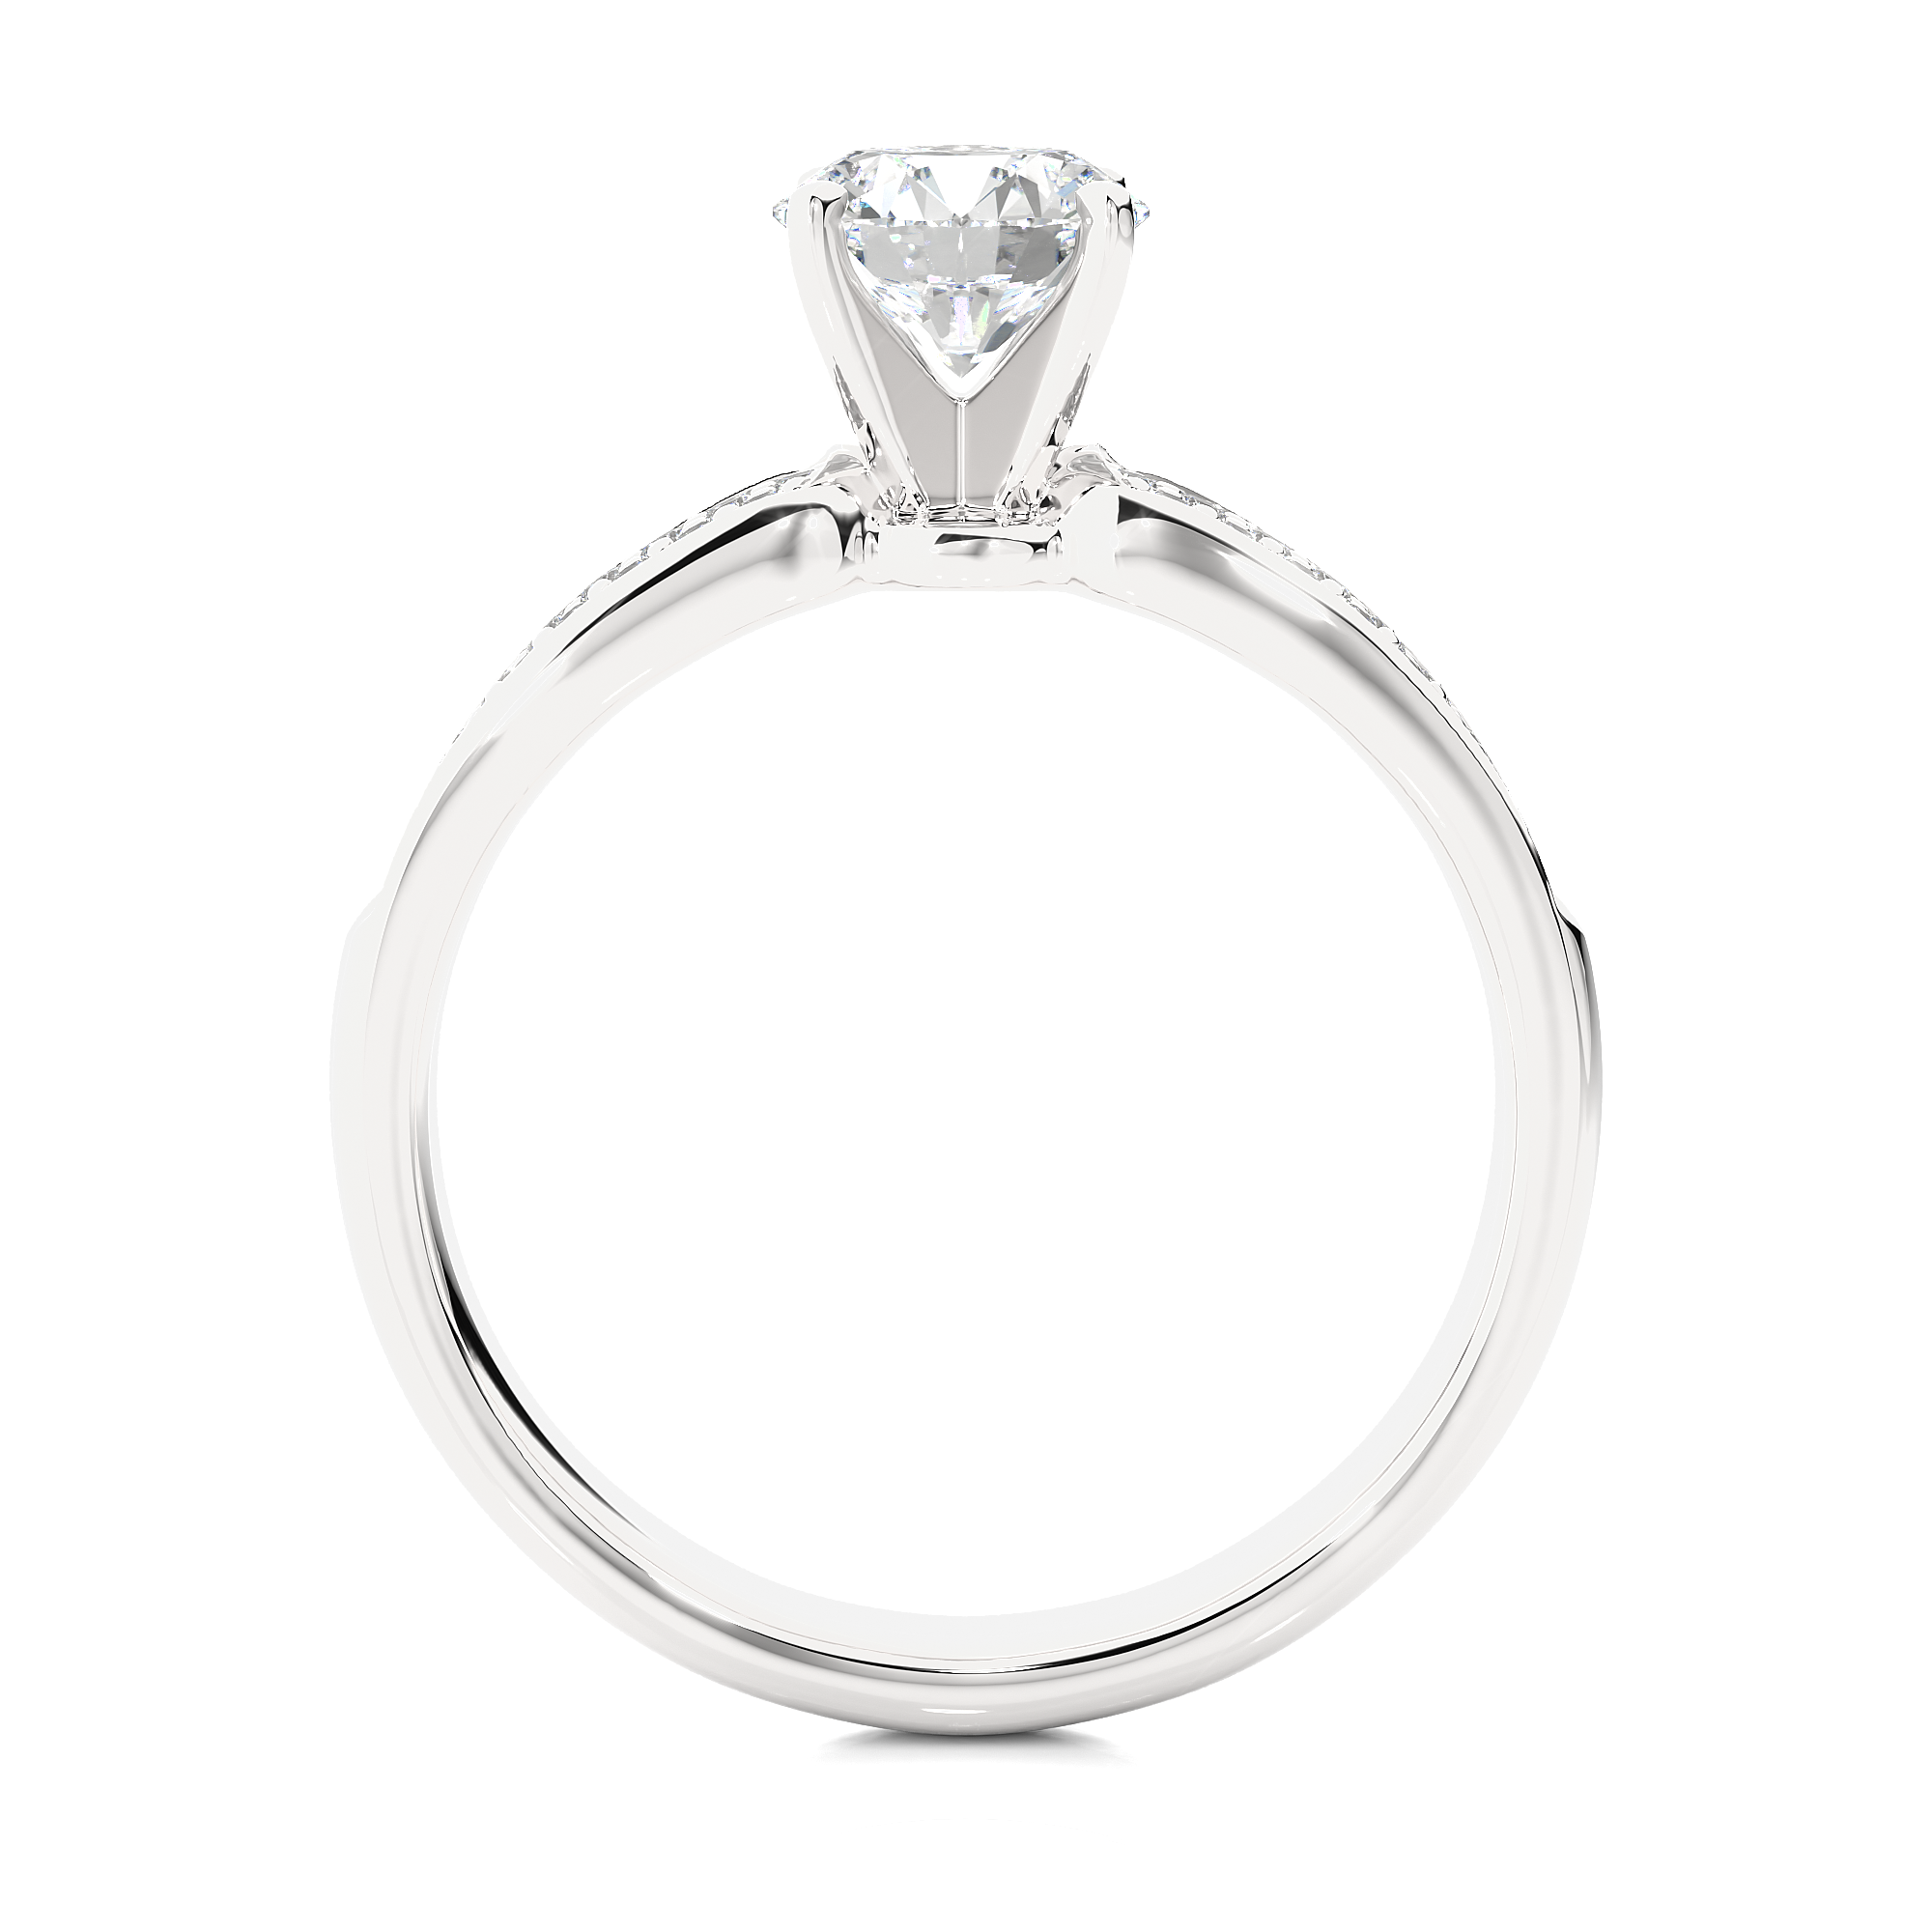 Catherine Ring - Solitaire Diamond Ring